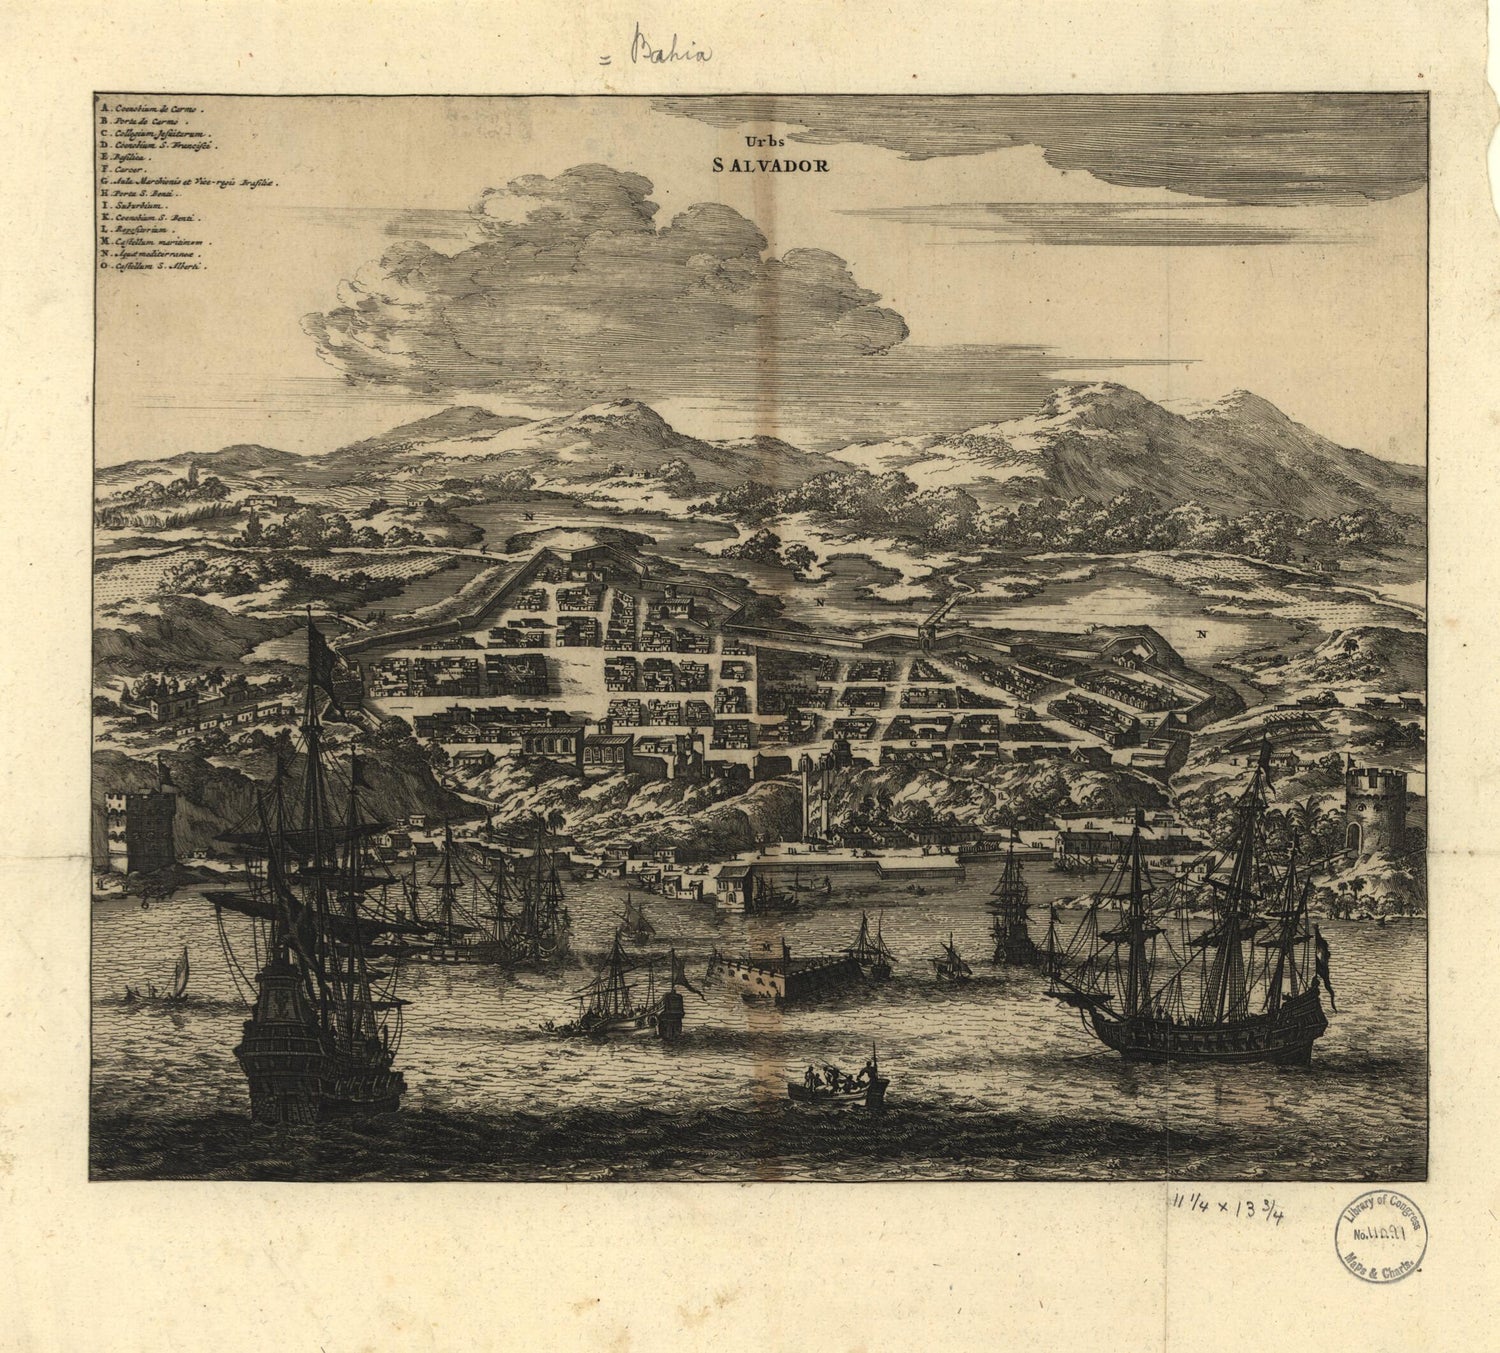 This old map of Urbs Salvador from 1671 was created by Arnoldus Montanus in 1671